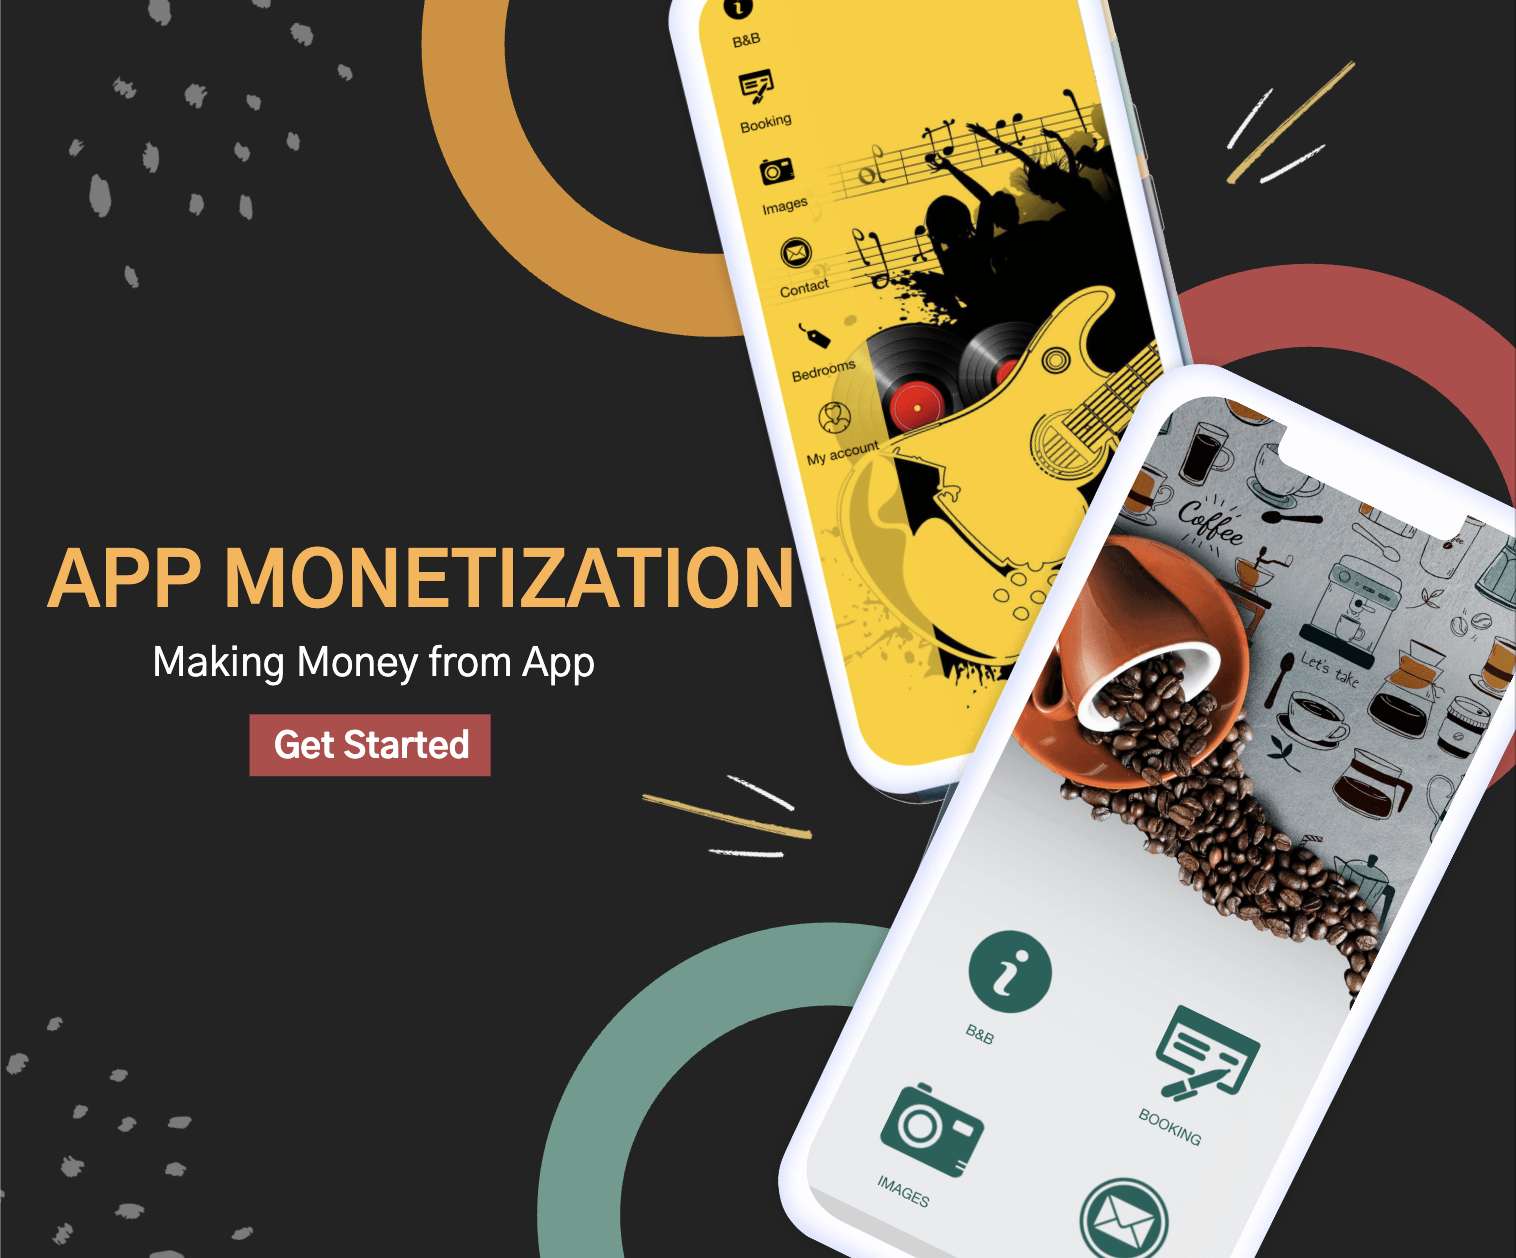 How to make money from apps Using Fremium app monetization